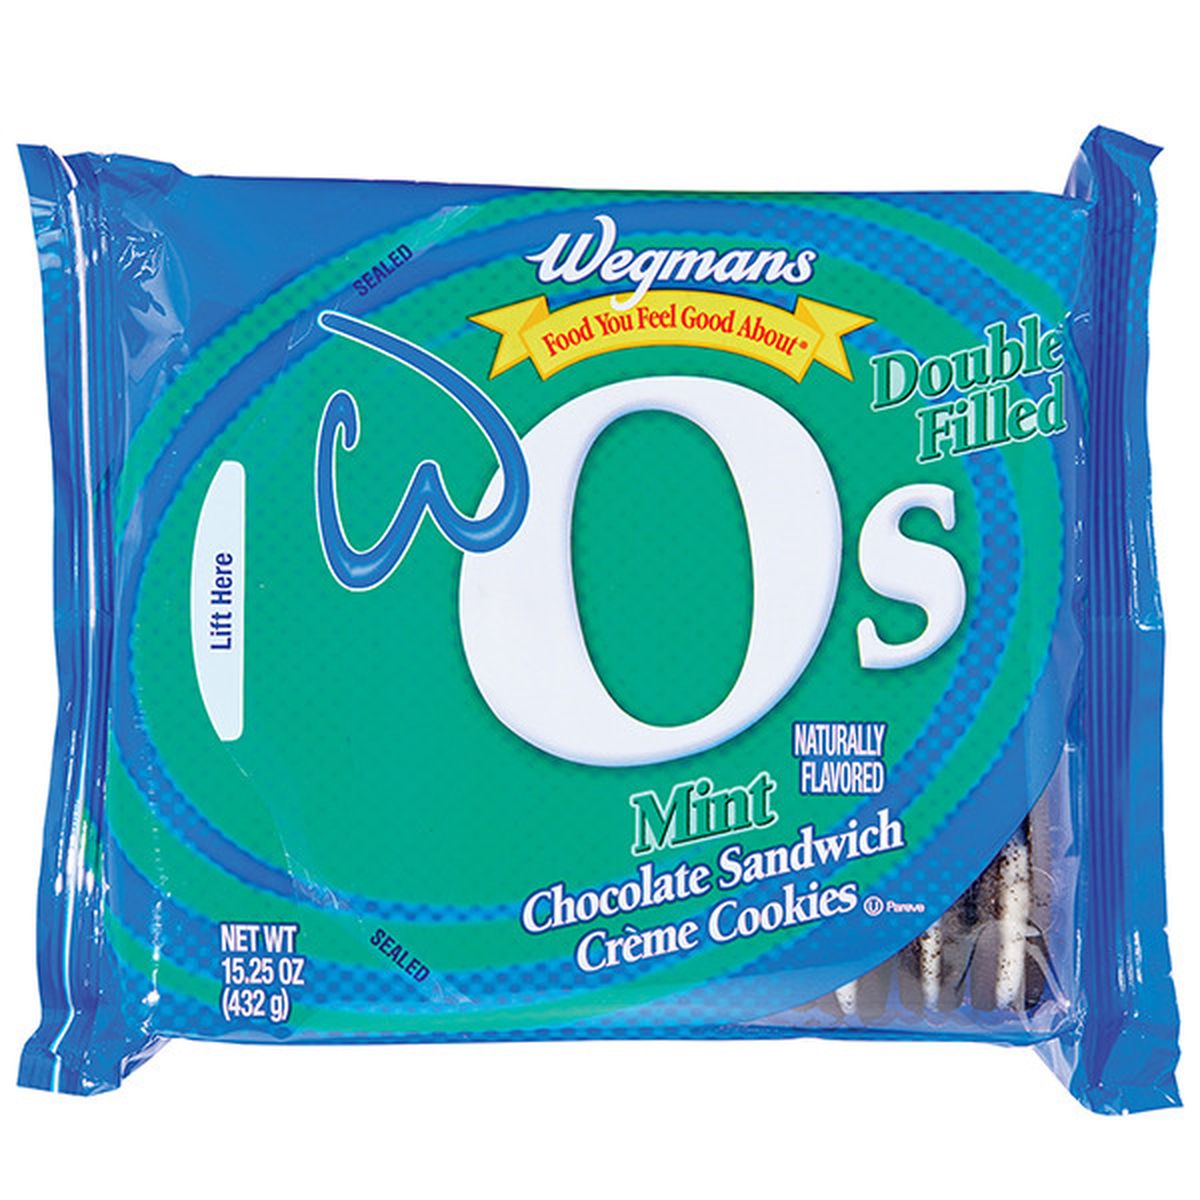 Calories in Wegmans Double Filled Mint W O's: CrÃ¨me-Filled Chocolate Sandwich Cookies